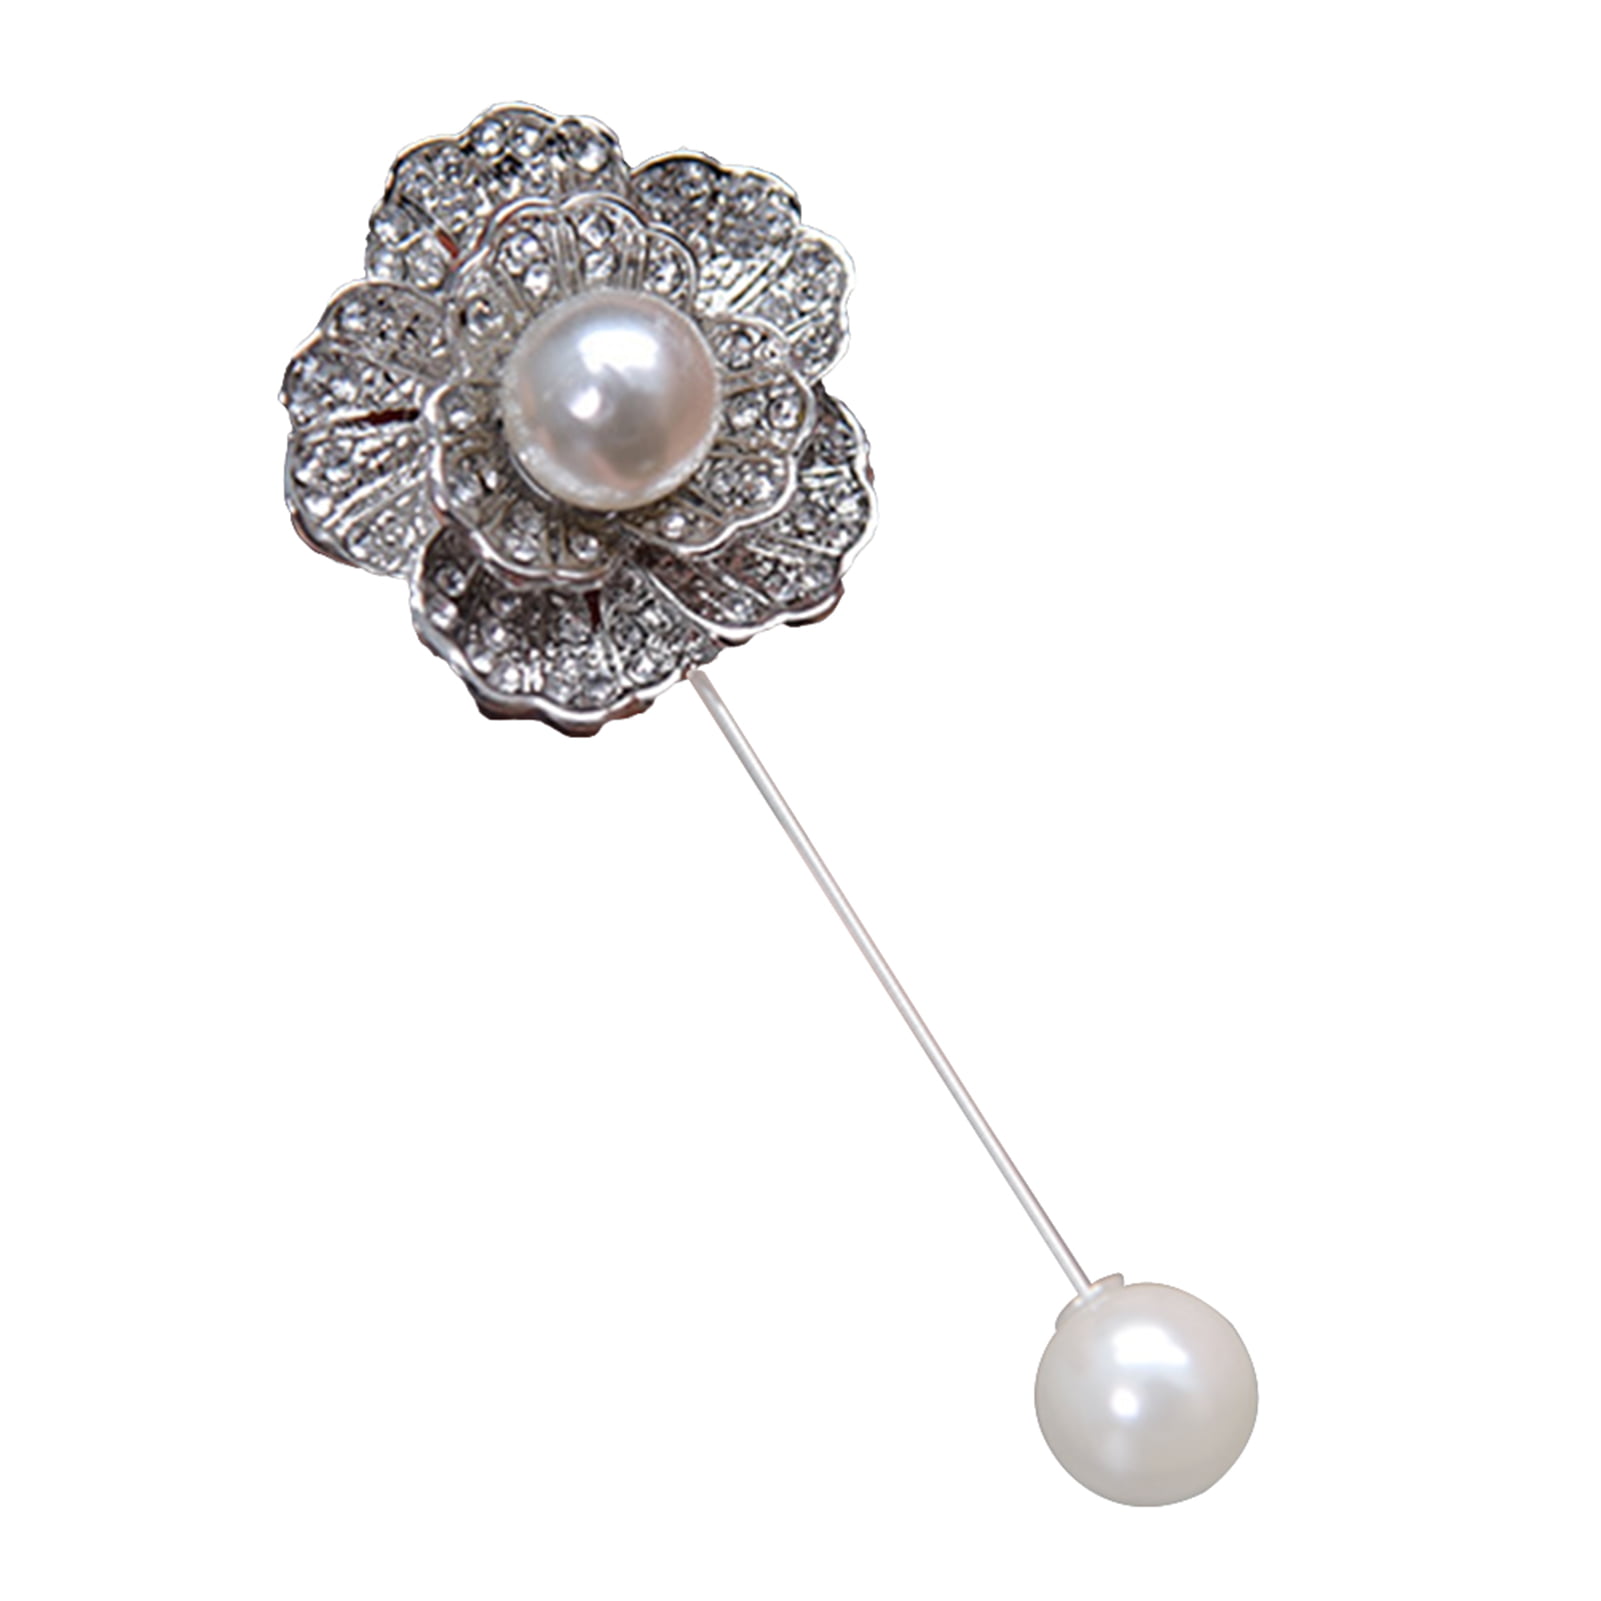 Artificial Imitation Pearls Brooch Elegant Brooches For Women Flower Wreath  Brooch Pin Suit Coat Pin Accessories Bridal Fashion Jewelry Lifelike